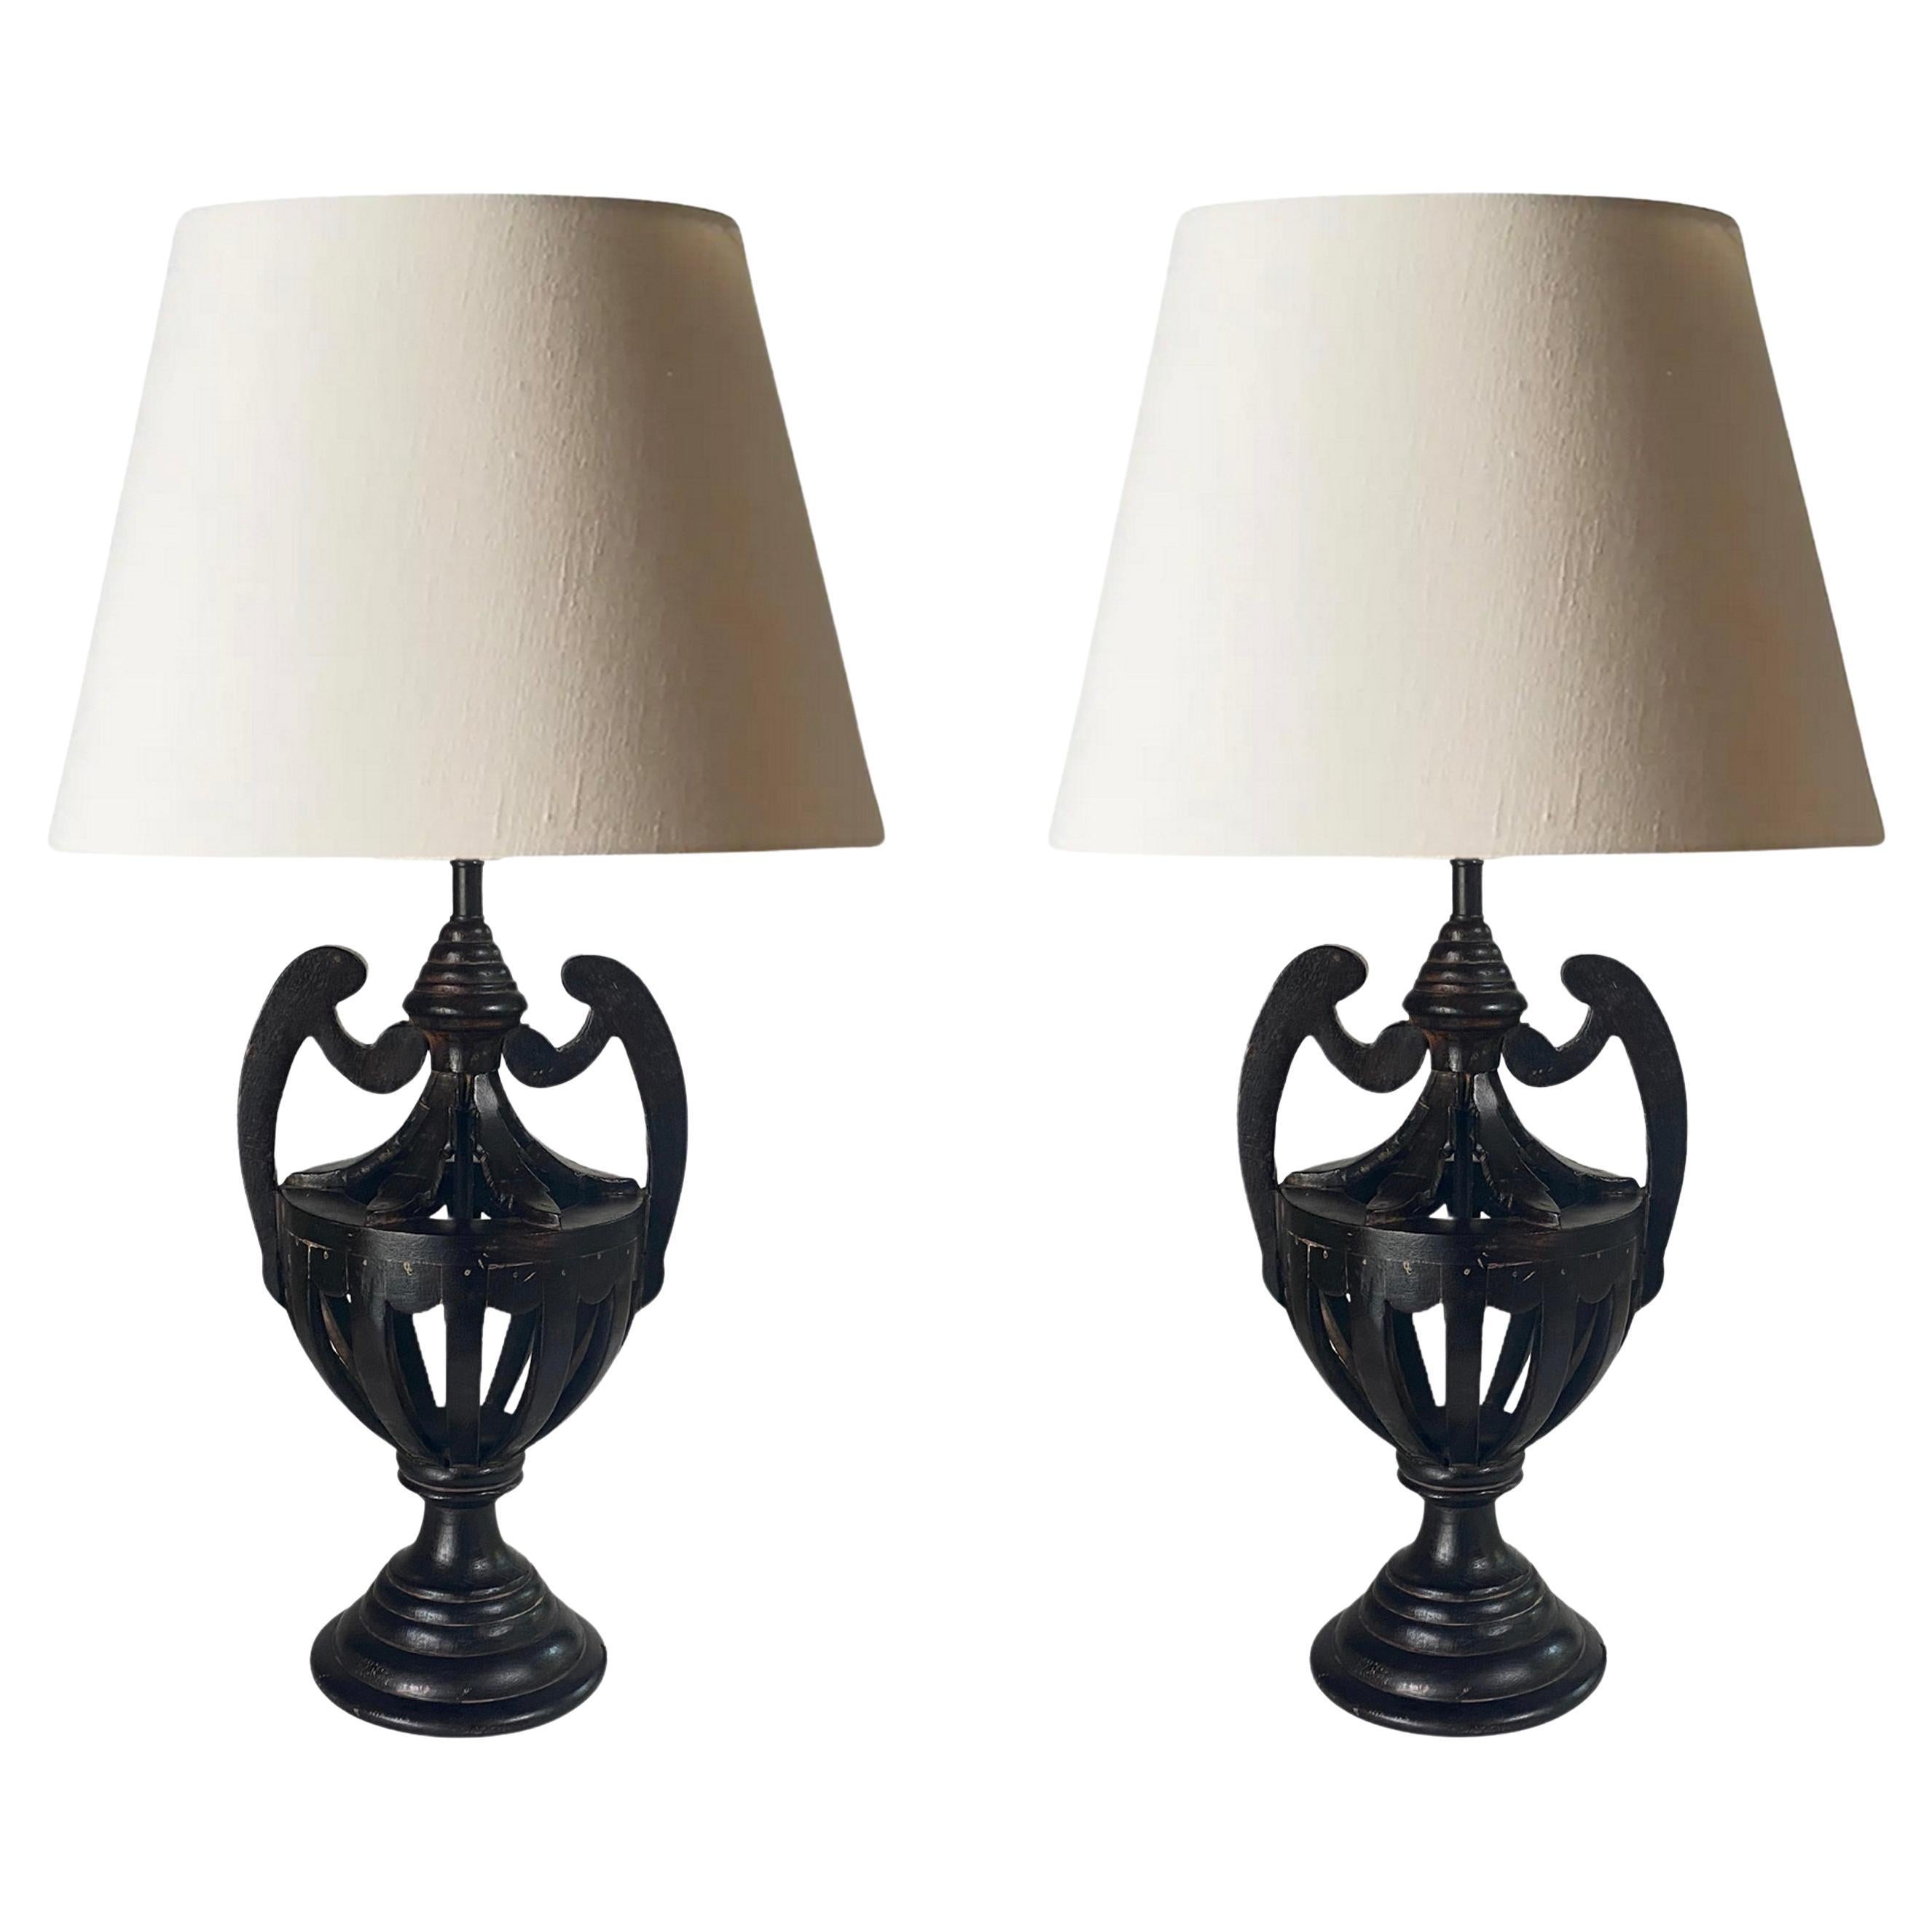 Franch Pair of Solid Wood Table Lamps Black Color 20th Century For Sale